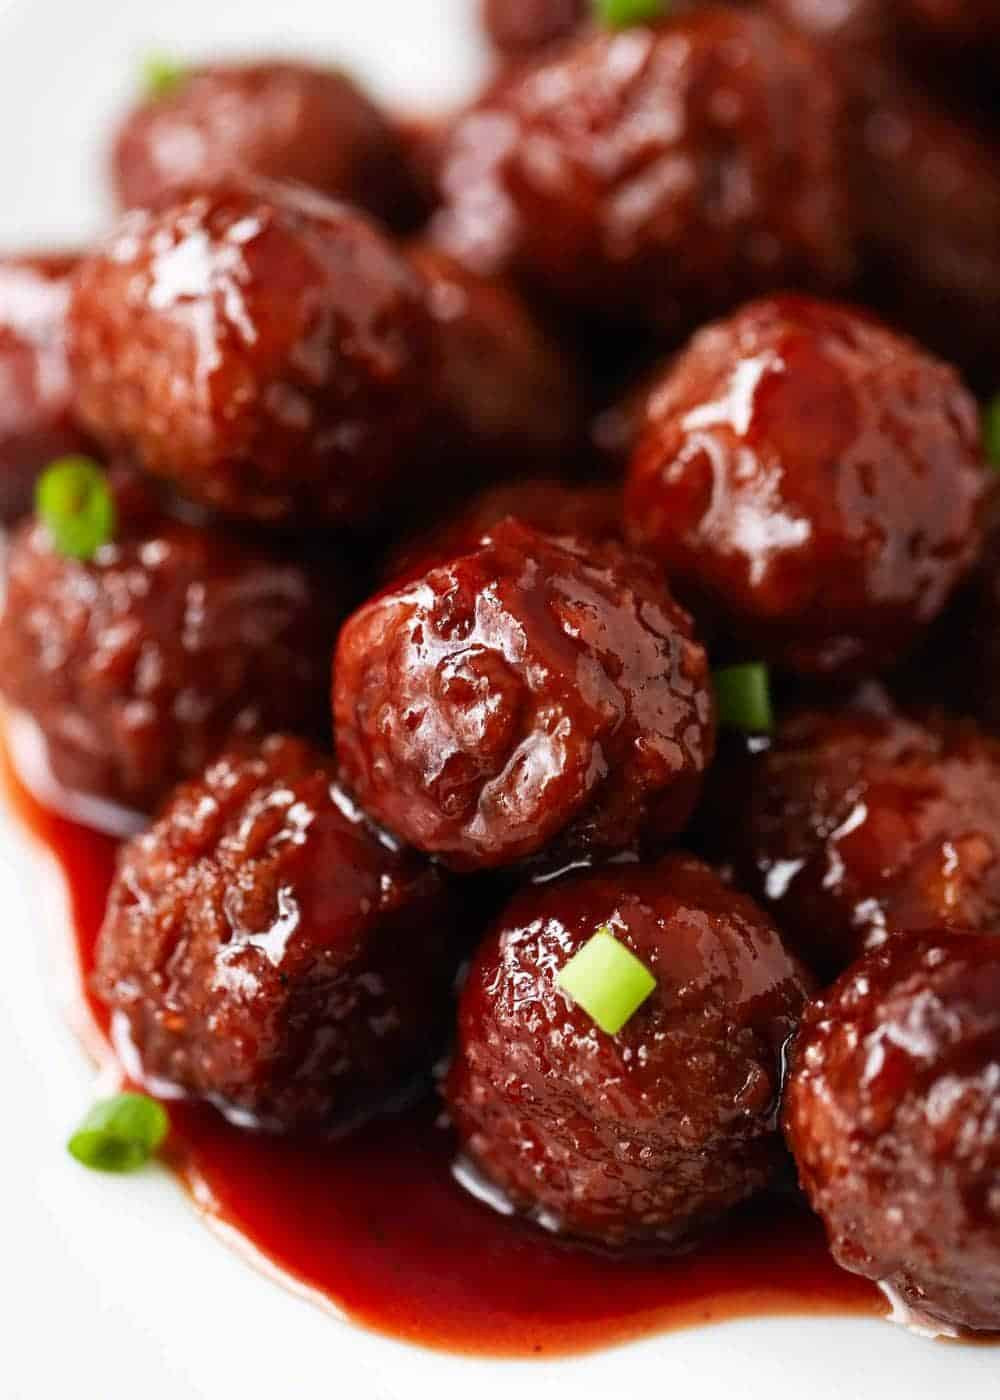 Meatballs With Jelly And Bbq Sauce
 Crockpot grape jelly & BBQ meatballs only 3 ingre nts